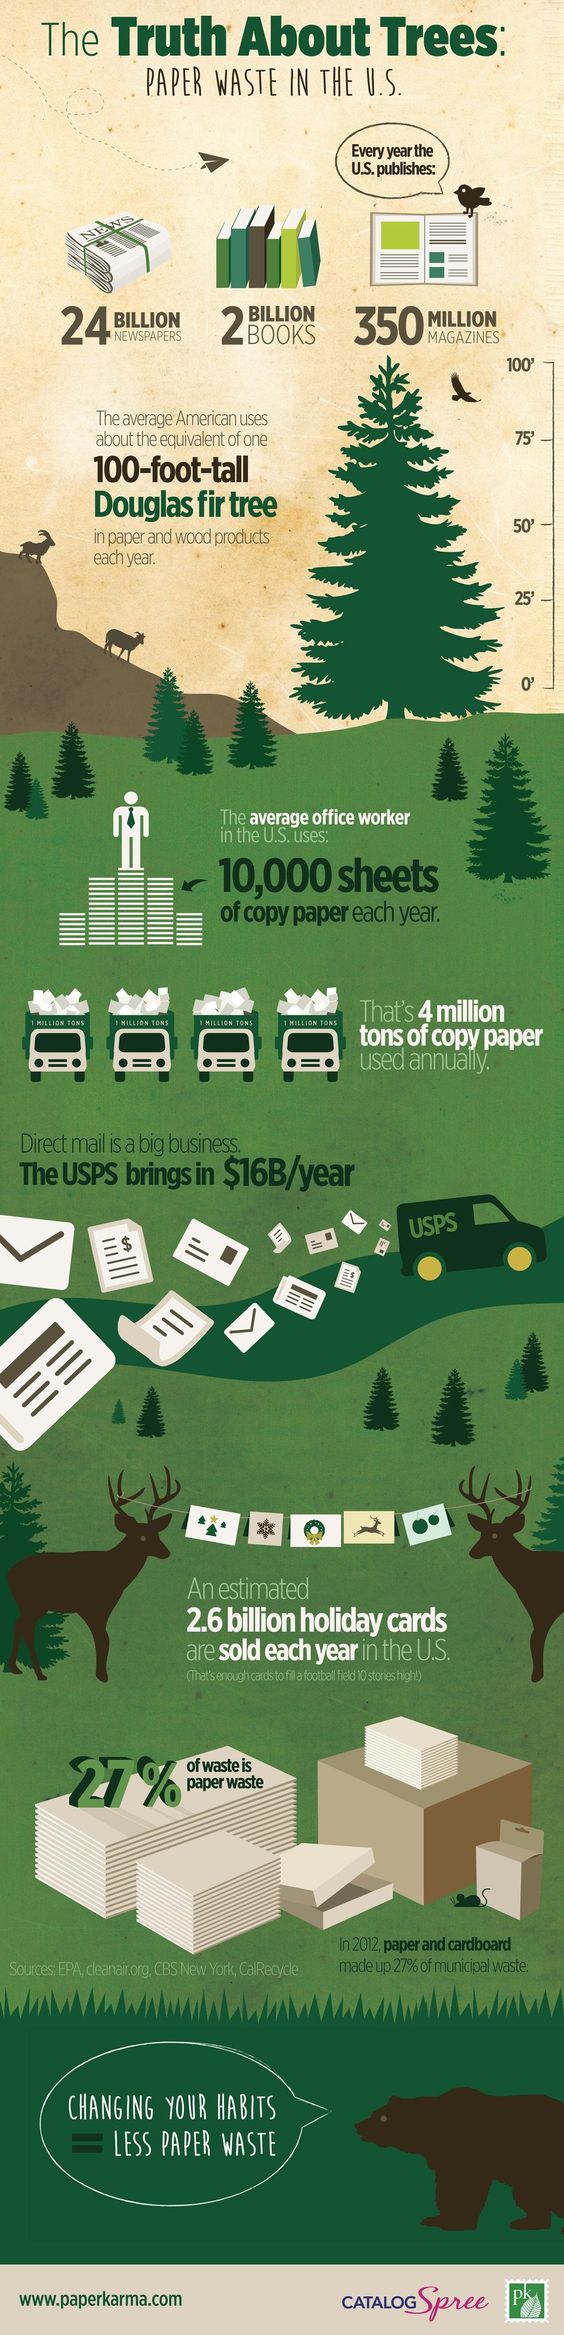 The average  office worker uses 10,000 sheets of paper per year.